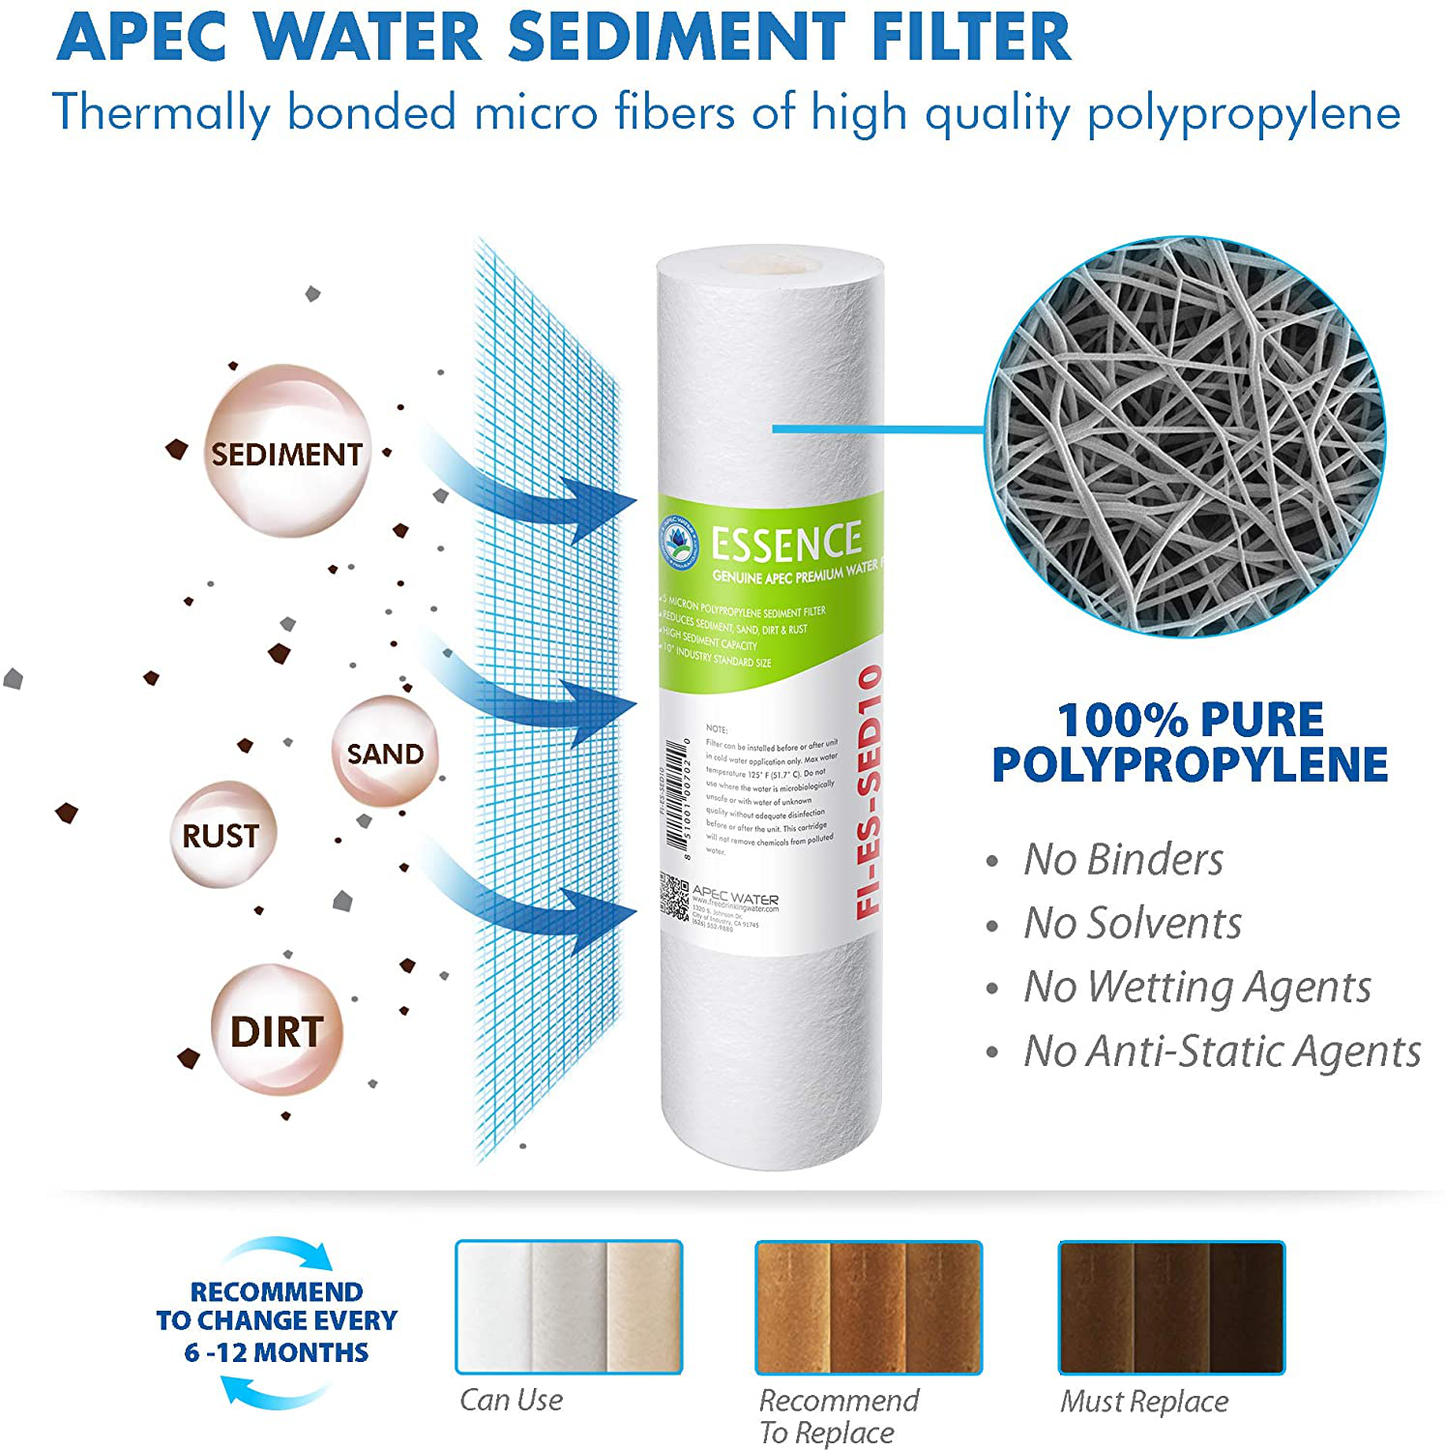 APEC Water Systems FILTER-MAX-ES50 50 GPD High Capacity Complete Replacement Filter Set & Water Systems SET 3 Pcs 3.5" O.D. Replacement O-Ring For Reverse Osmosis Water Filter Housings, Black